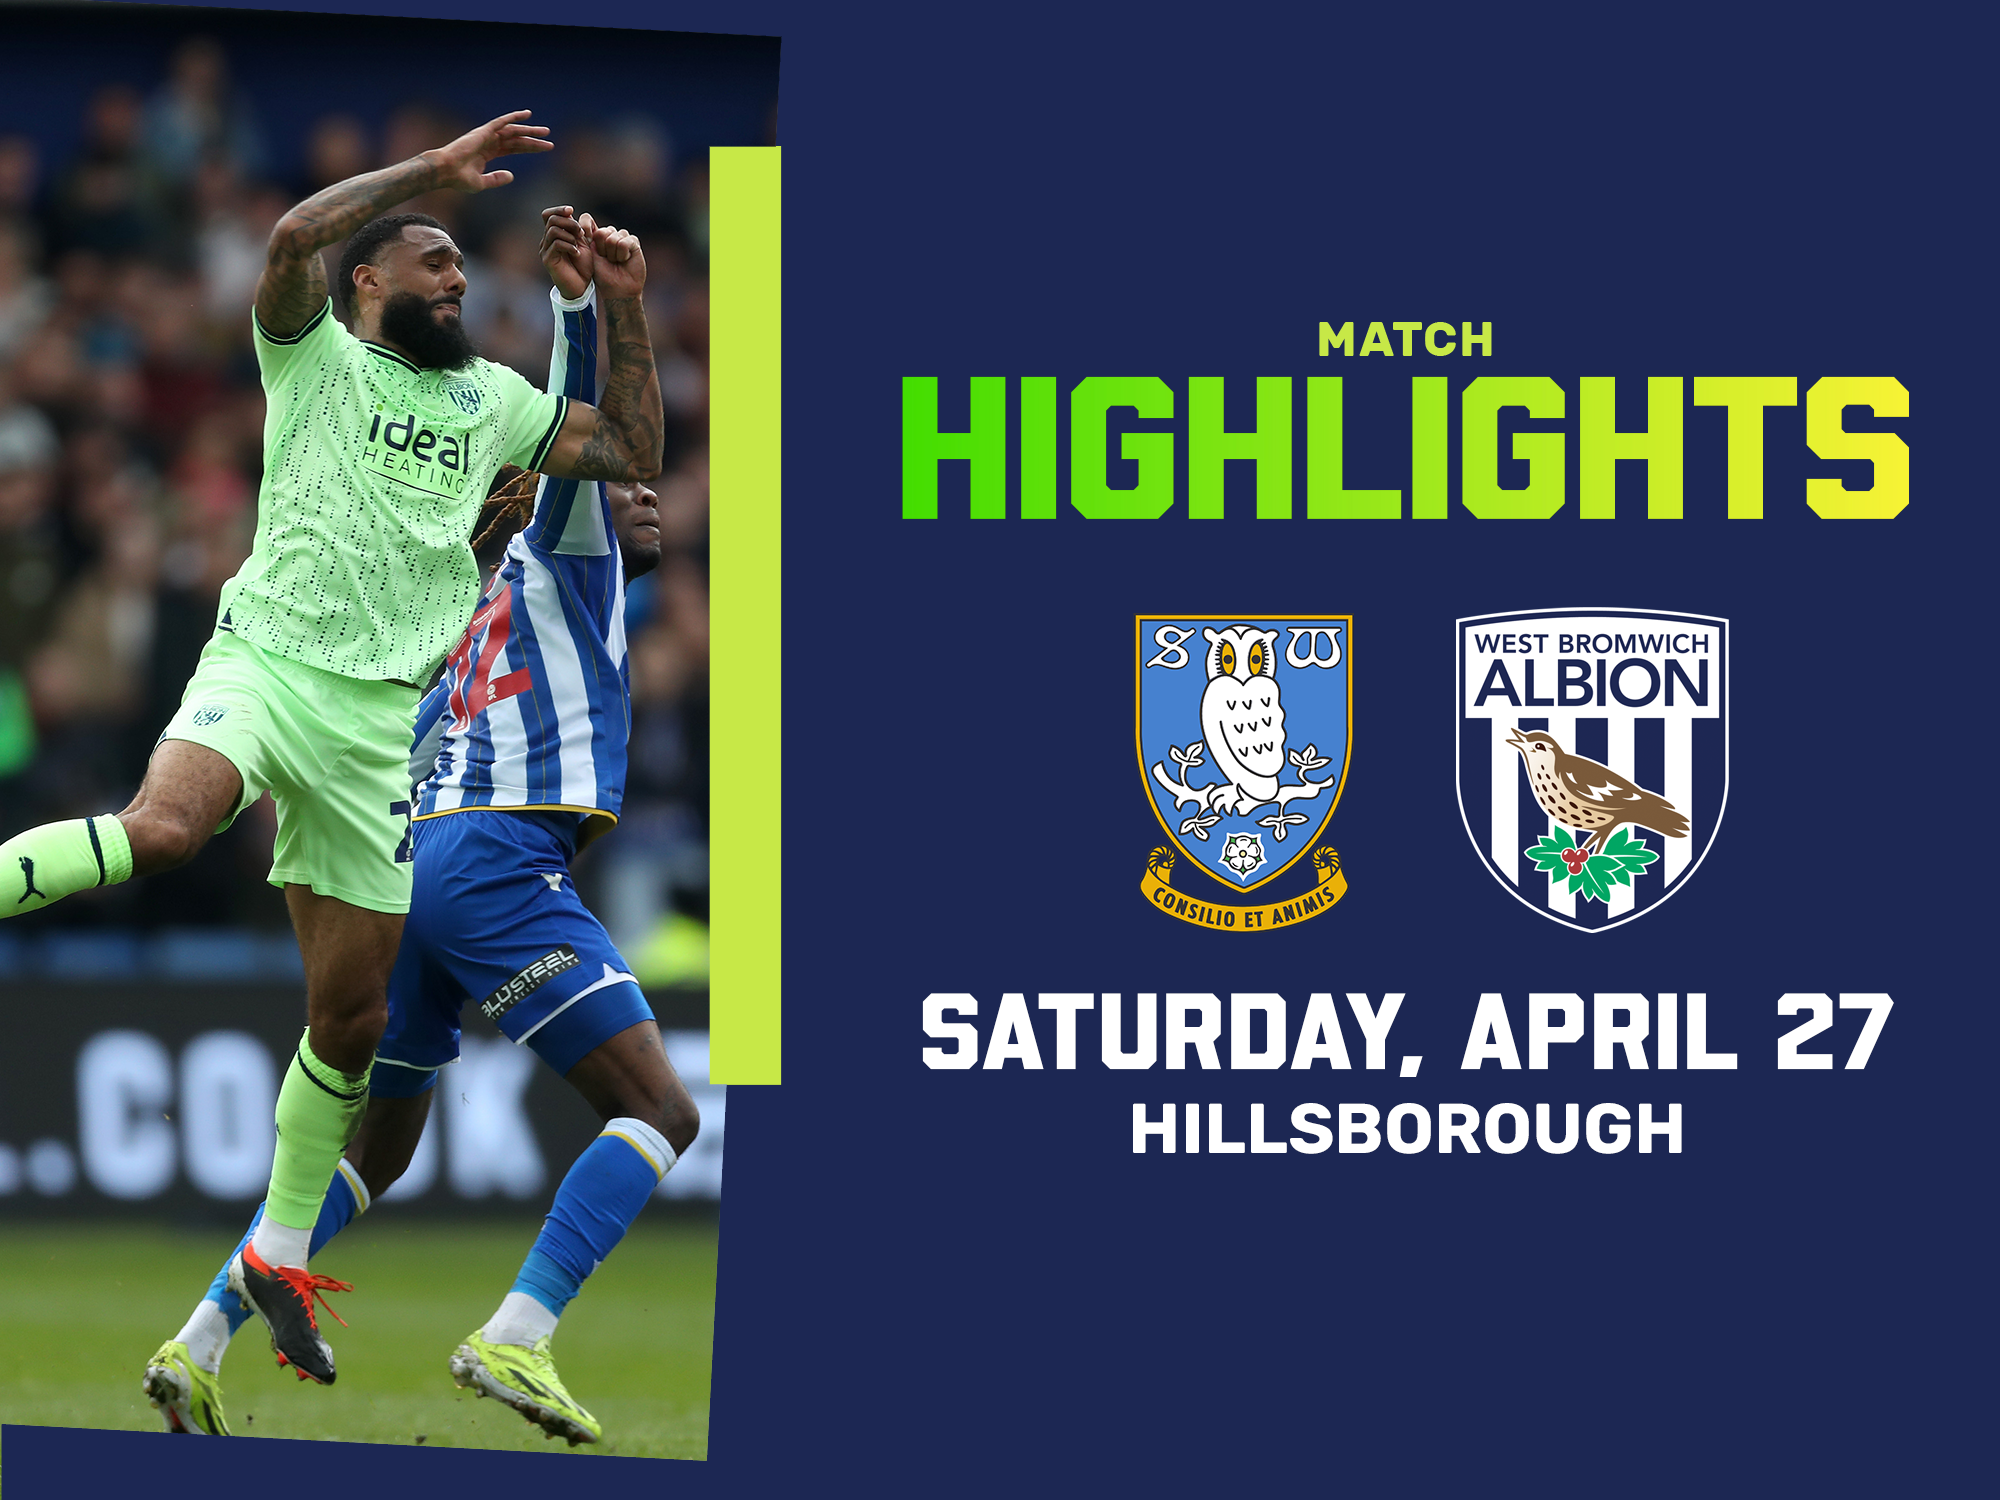 A match highlights graphic in the 23/24 green away colours, showing the club crests of Sheffield Wednesday and Albion, along with a action image of Yann M'Vila battling for the ball